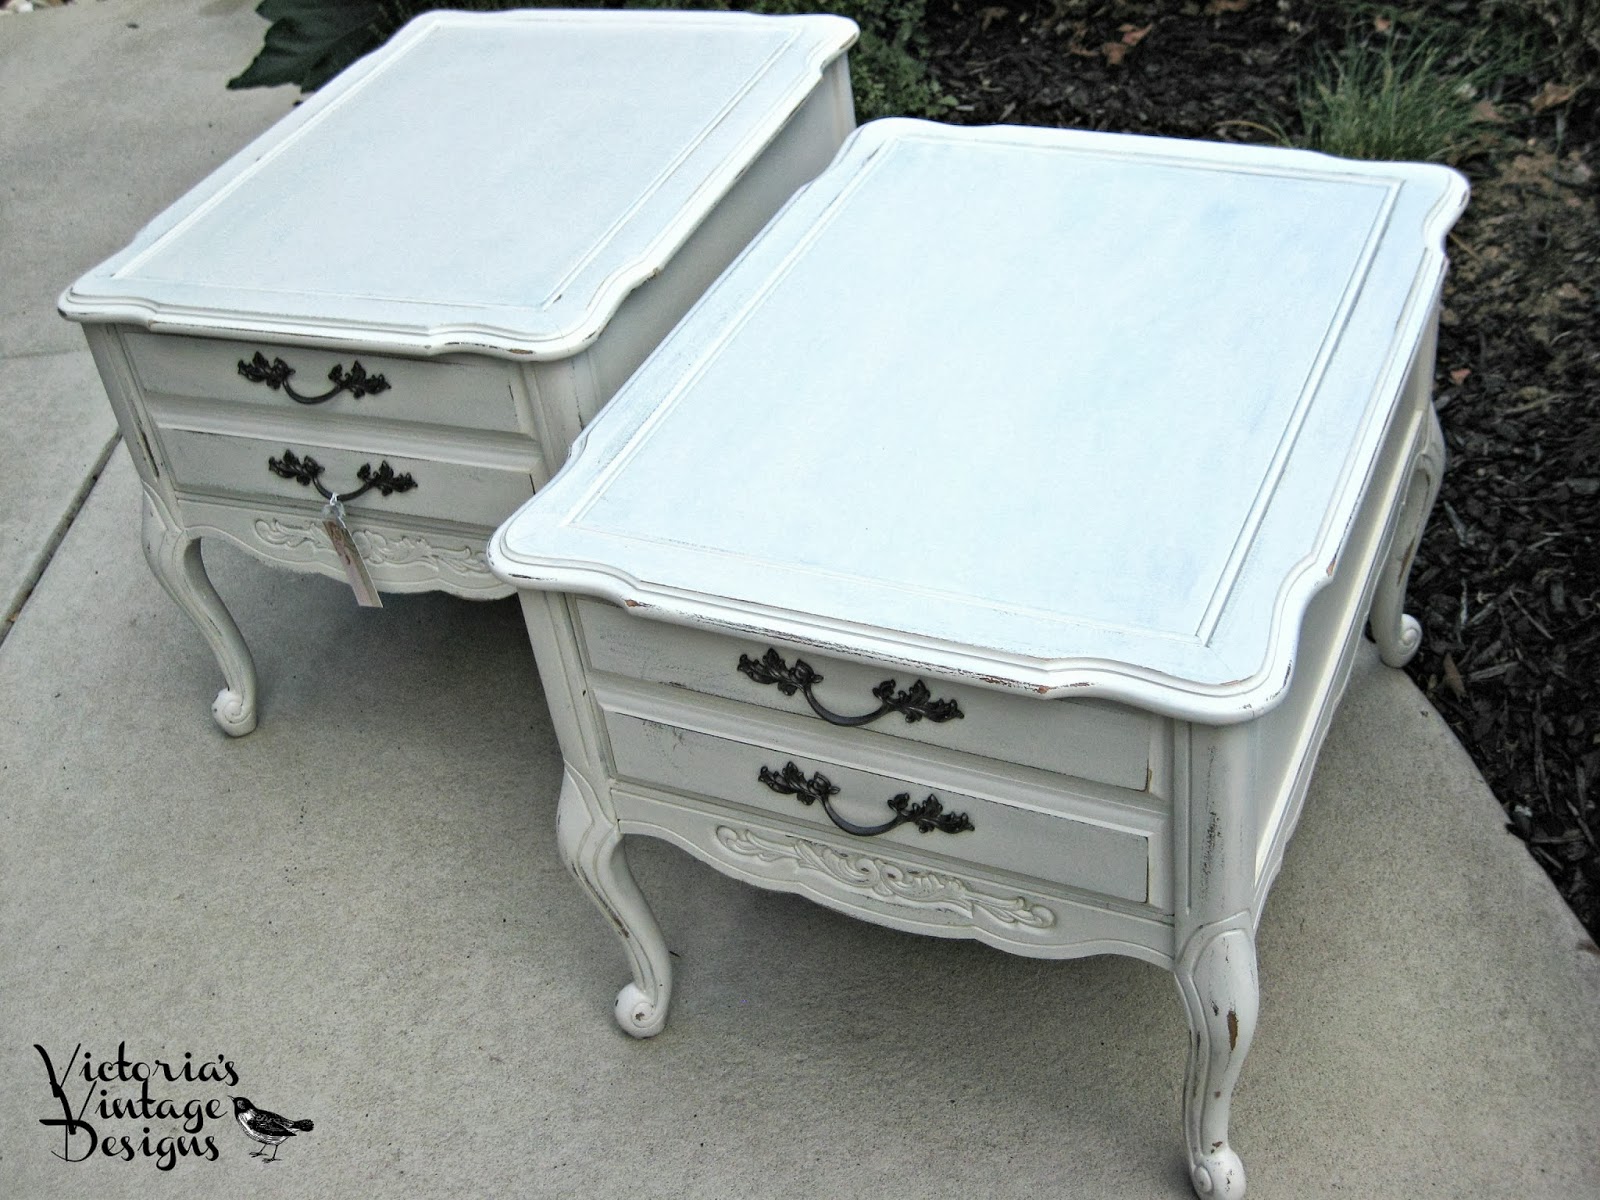 Victoria's Vintage Designs: Shabby~Cottage Chic French Provincial ...